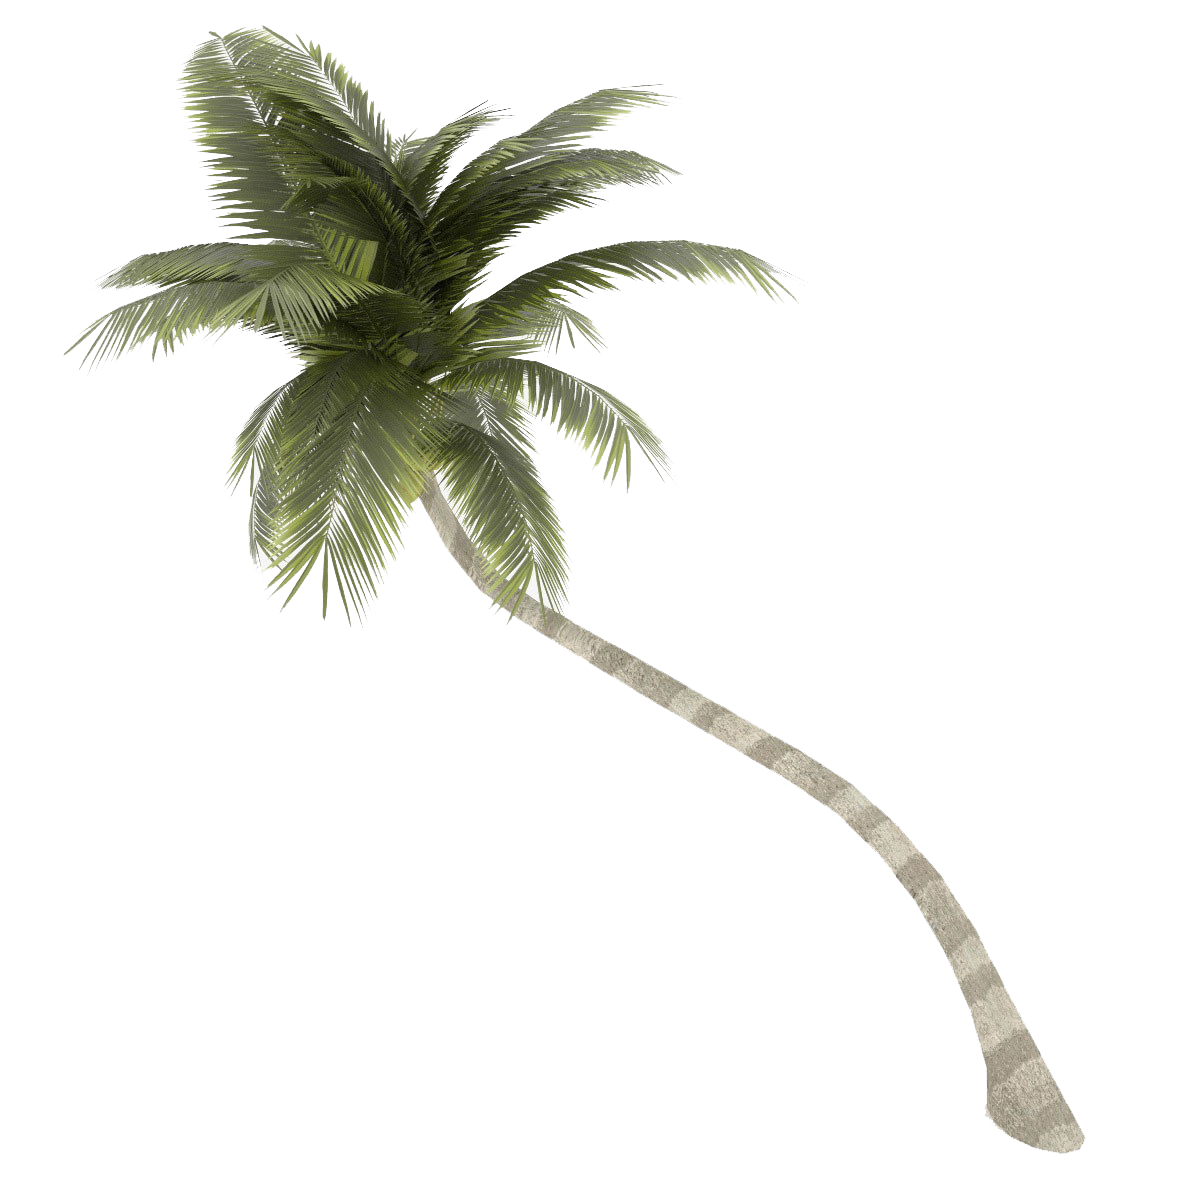 Png Coconut Tree - Coconut Tree Transparent Background, Transparent background PNG HD thumbnail